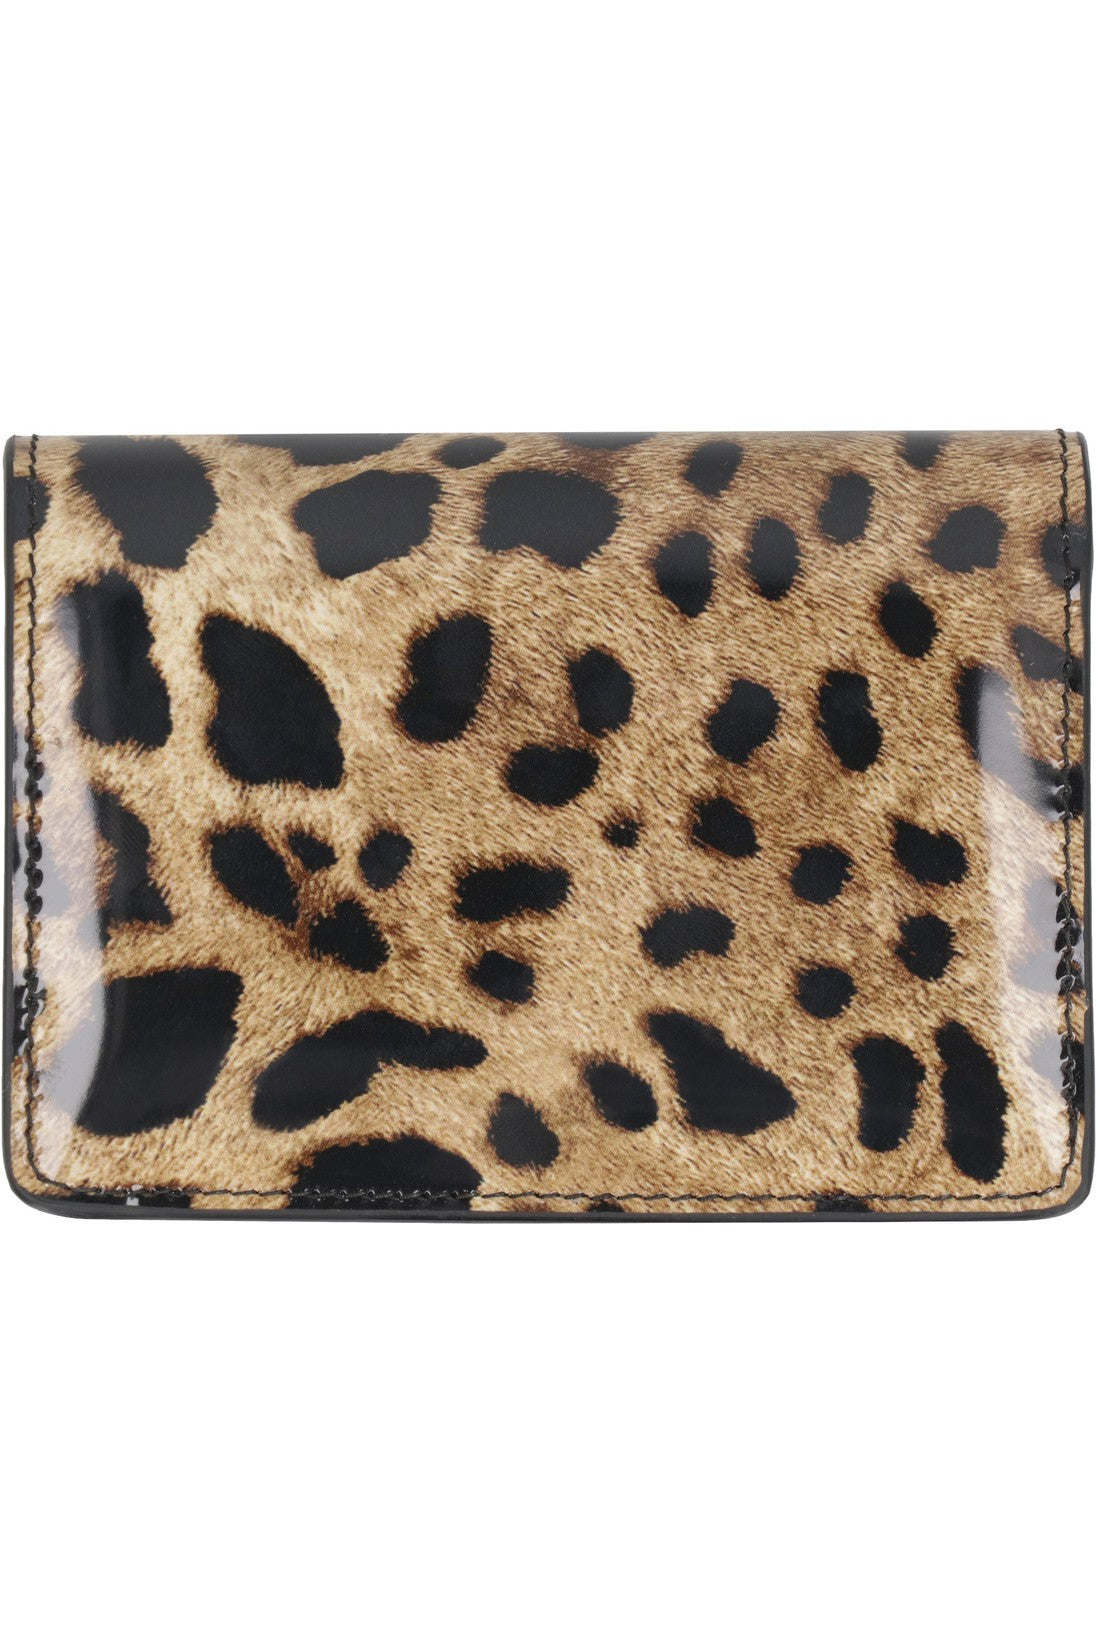 Dolce & Gabbana-OUTLET-SALE-Printed leather wallet-ARCHIVIST